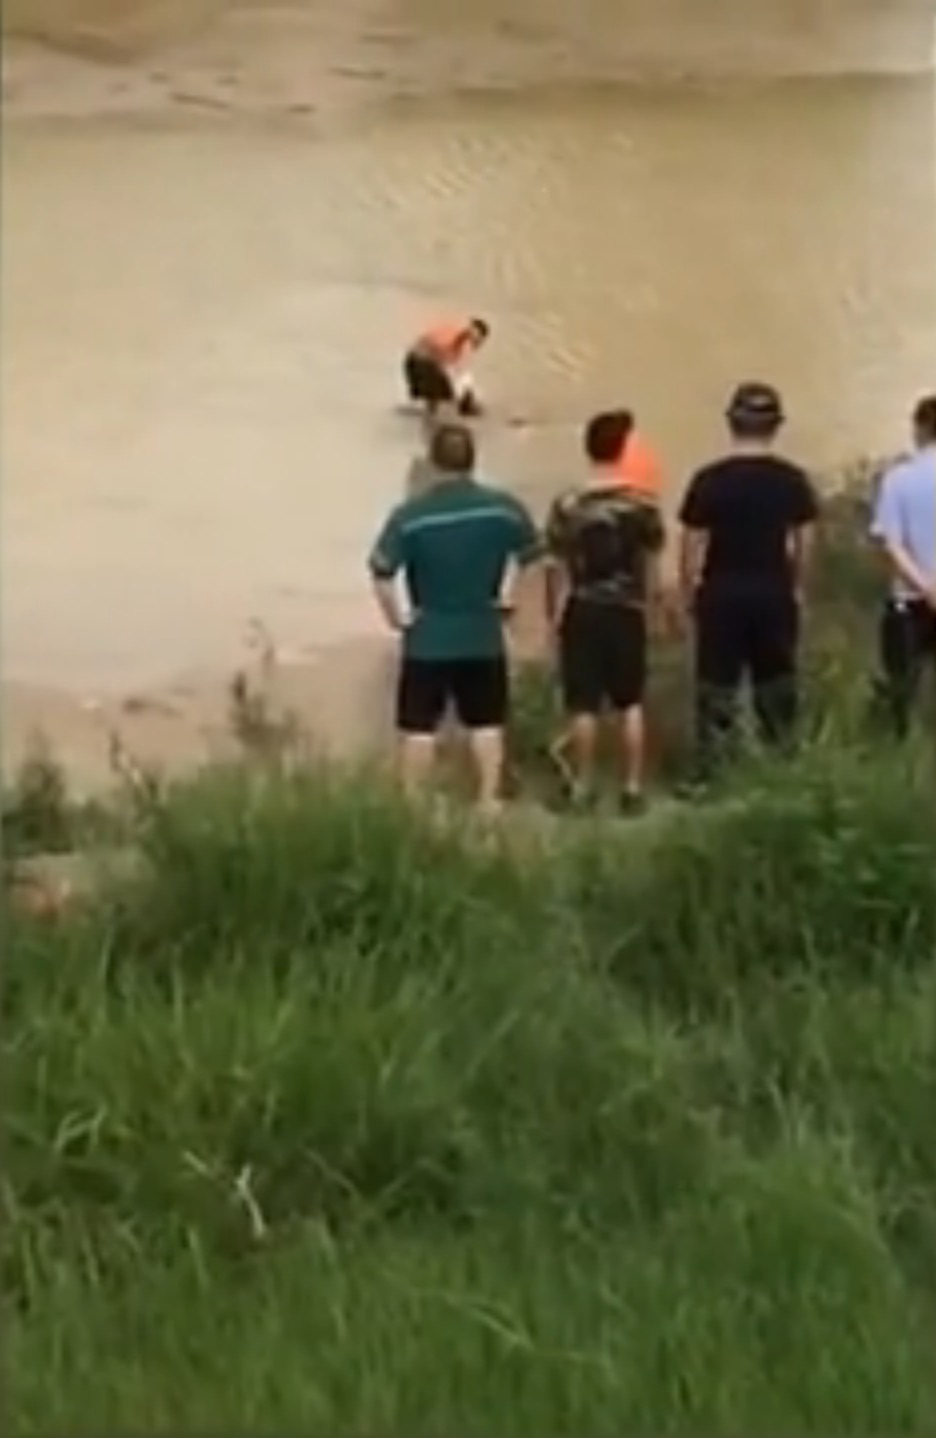 rescuer water bends down